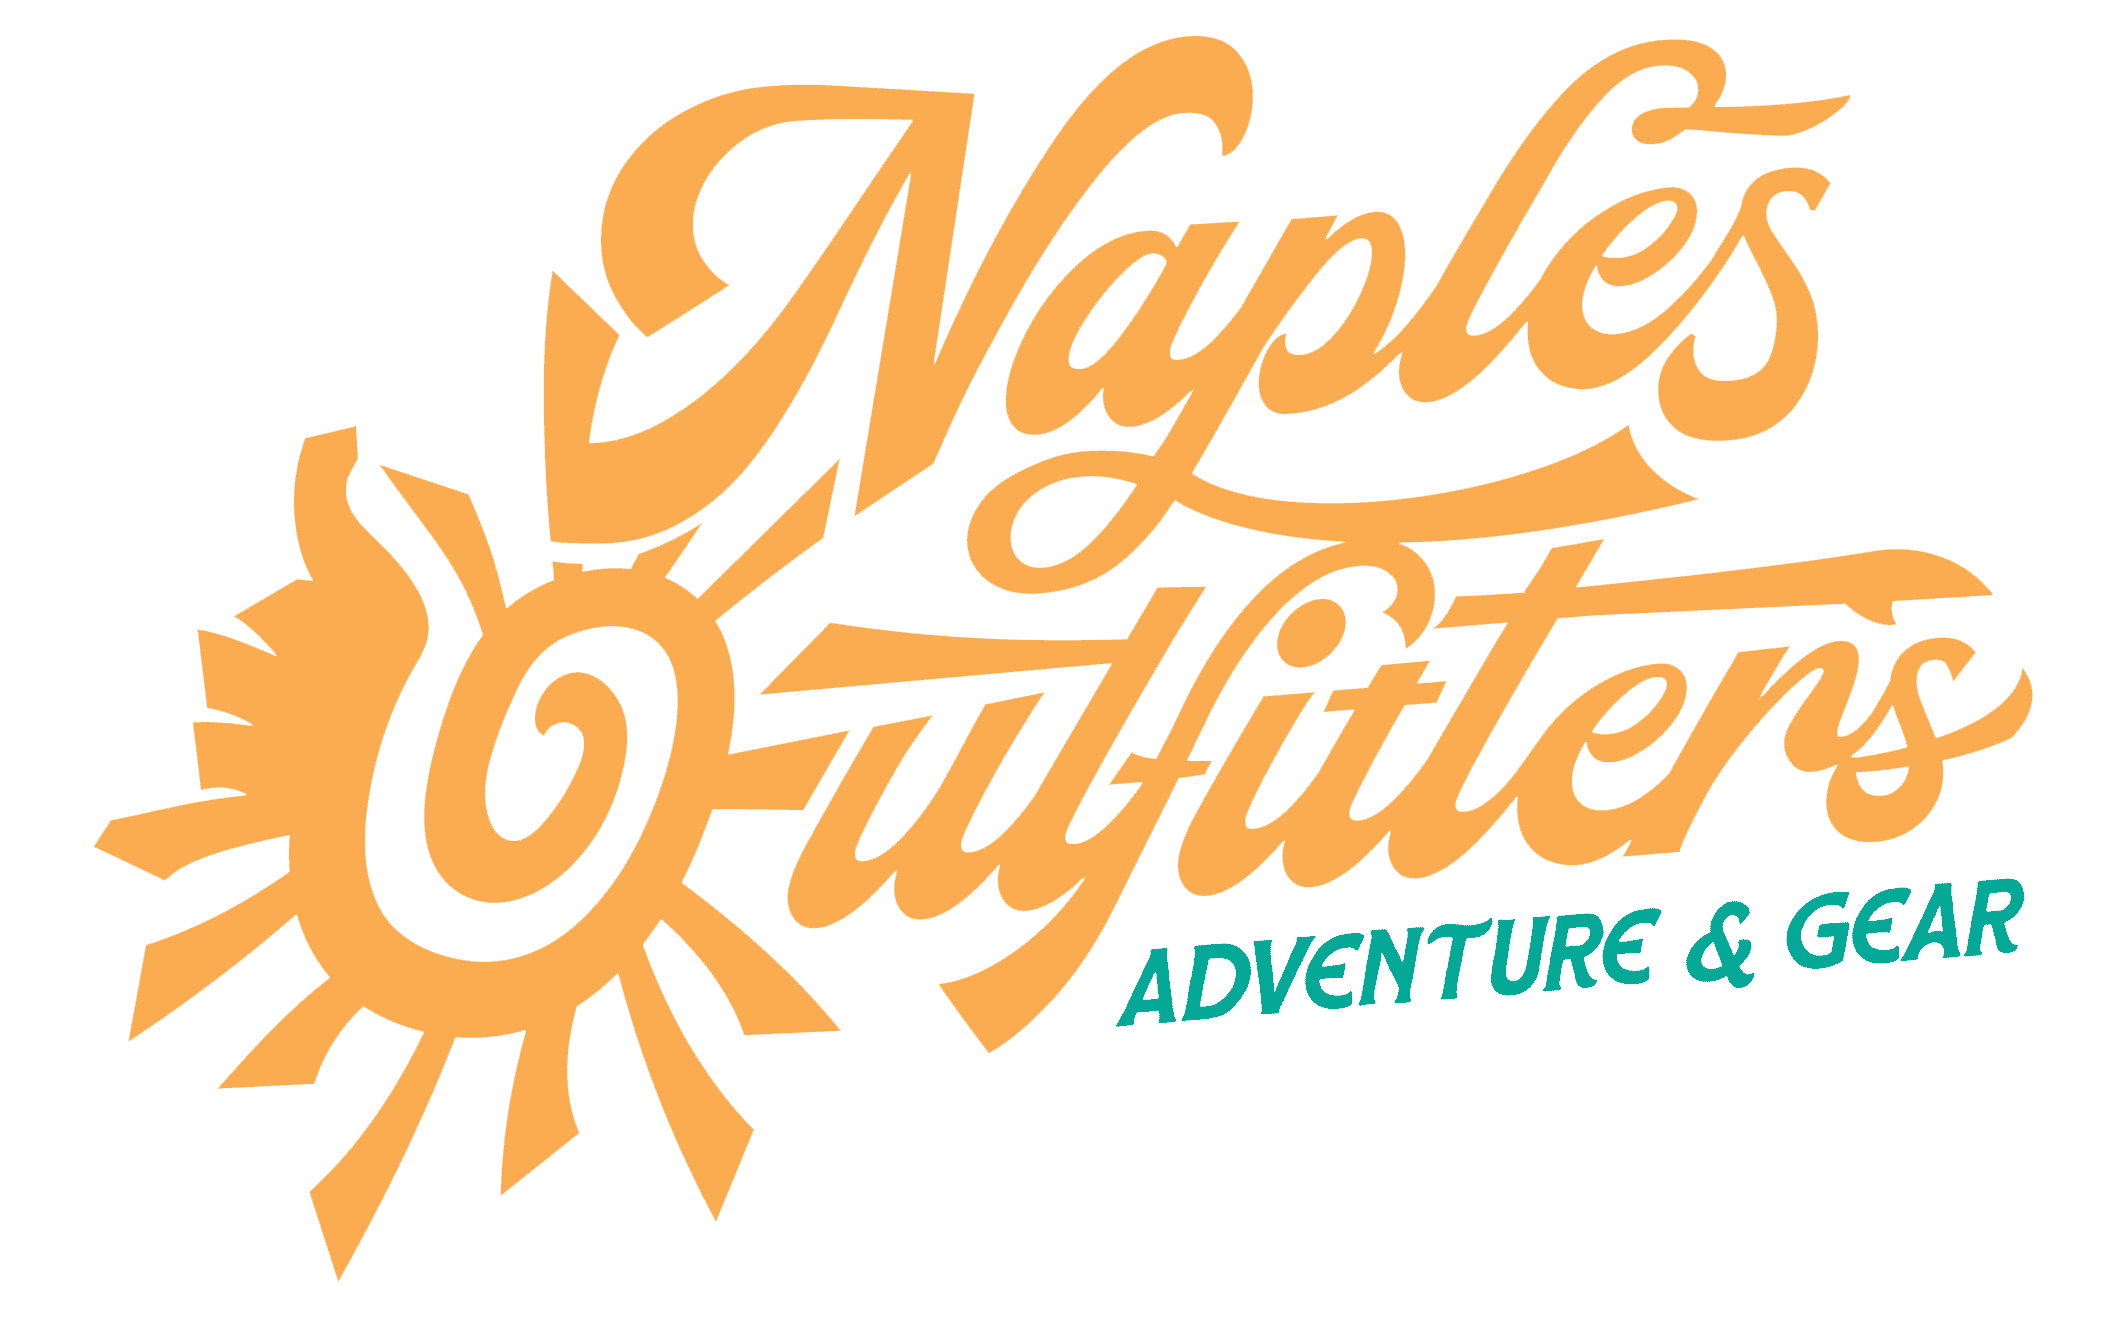 NAPLES OUTFITTERS